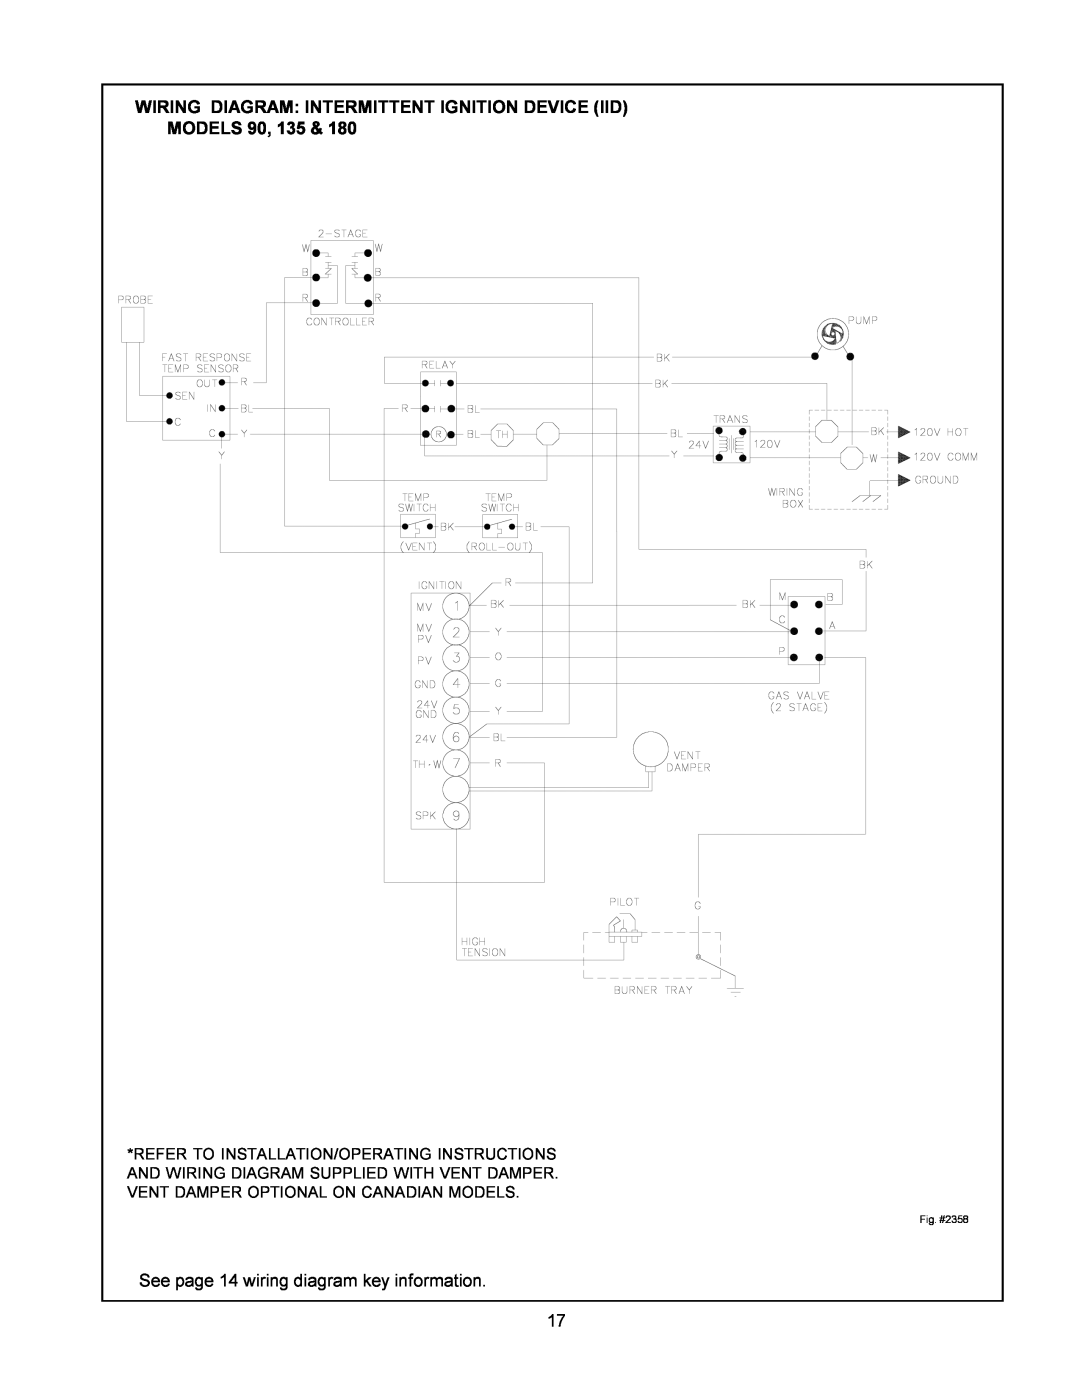 Raypak 0090B 0135B Wiring Diagram Intermittent Ignition Device Iid, Models, See page 14 wiring diagram key information 